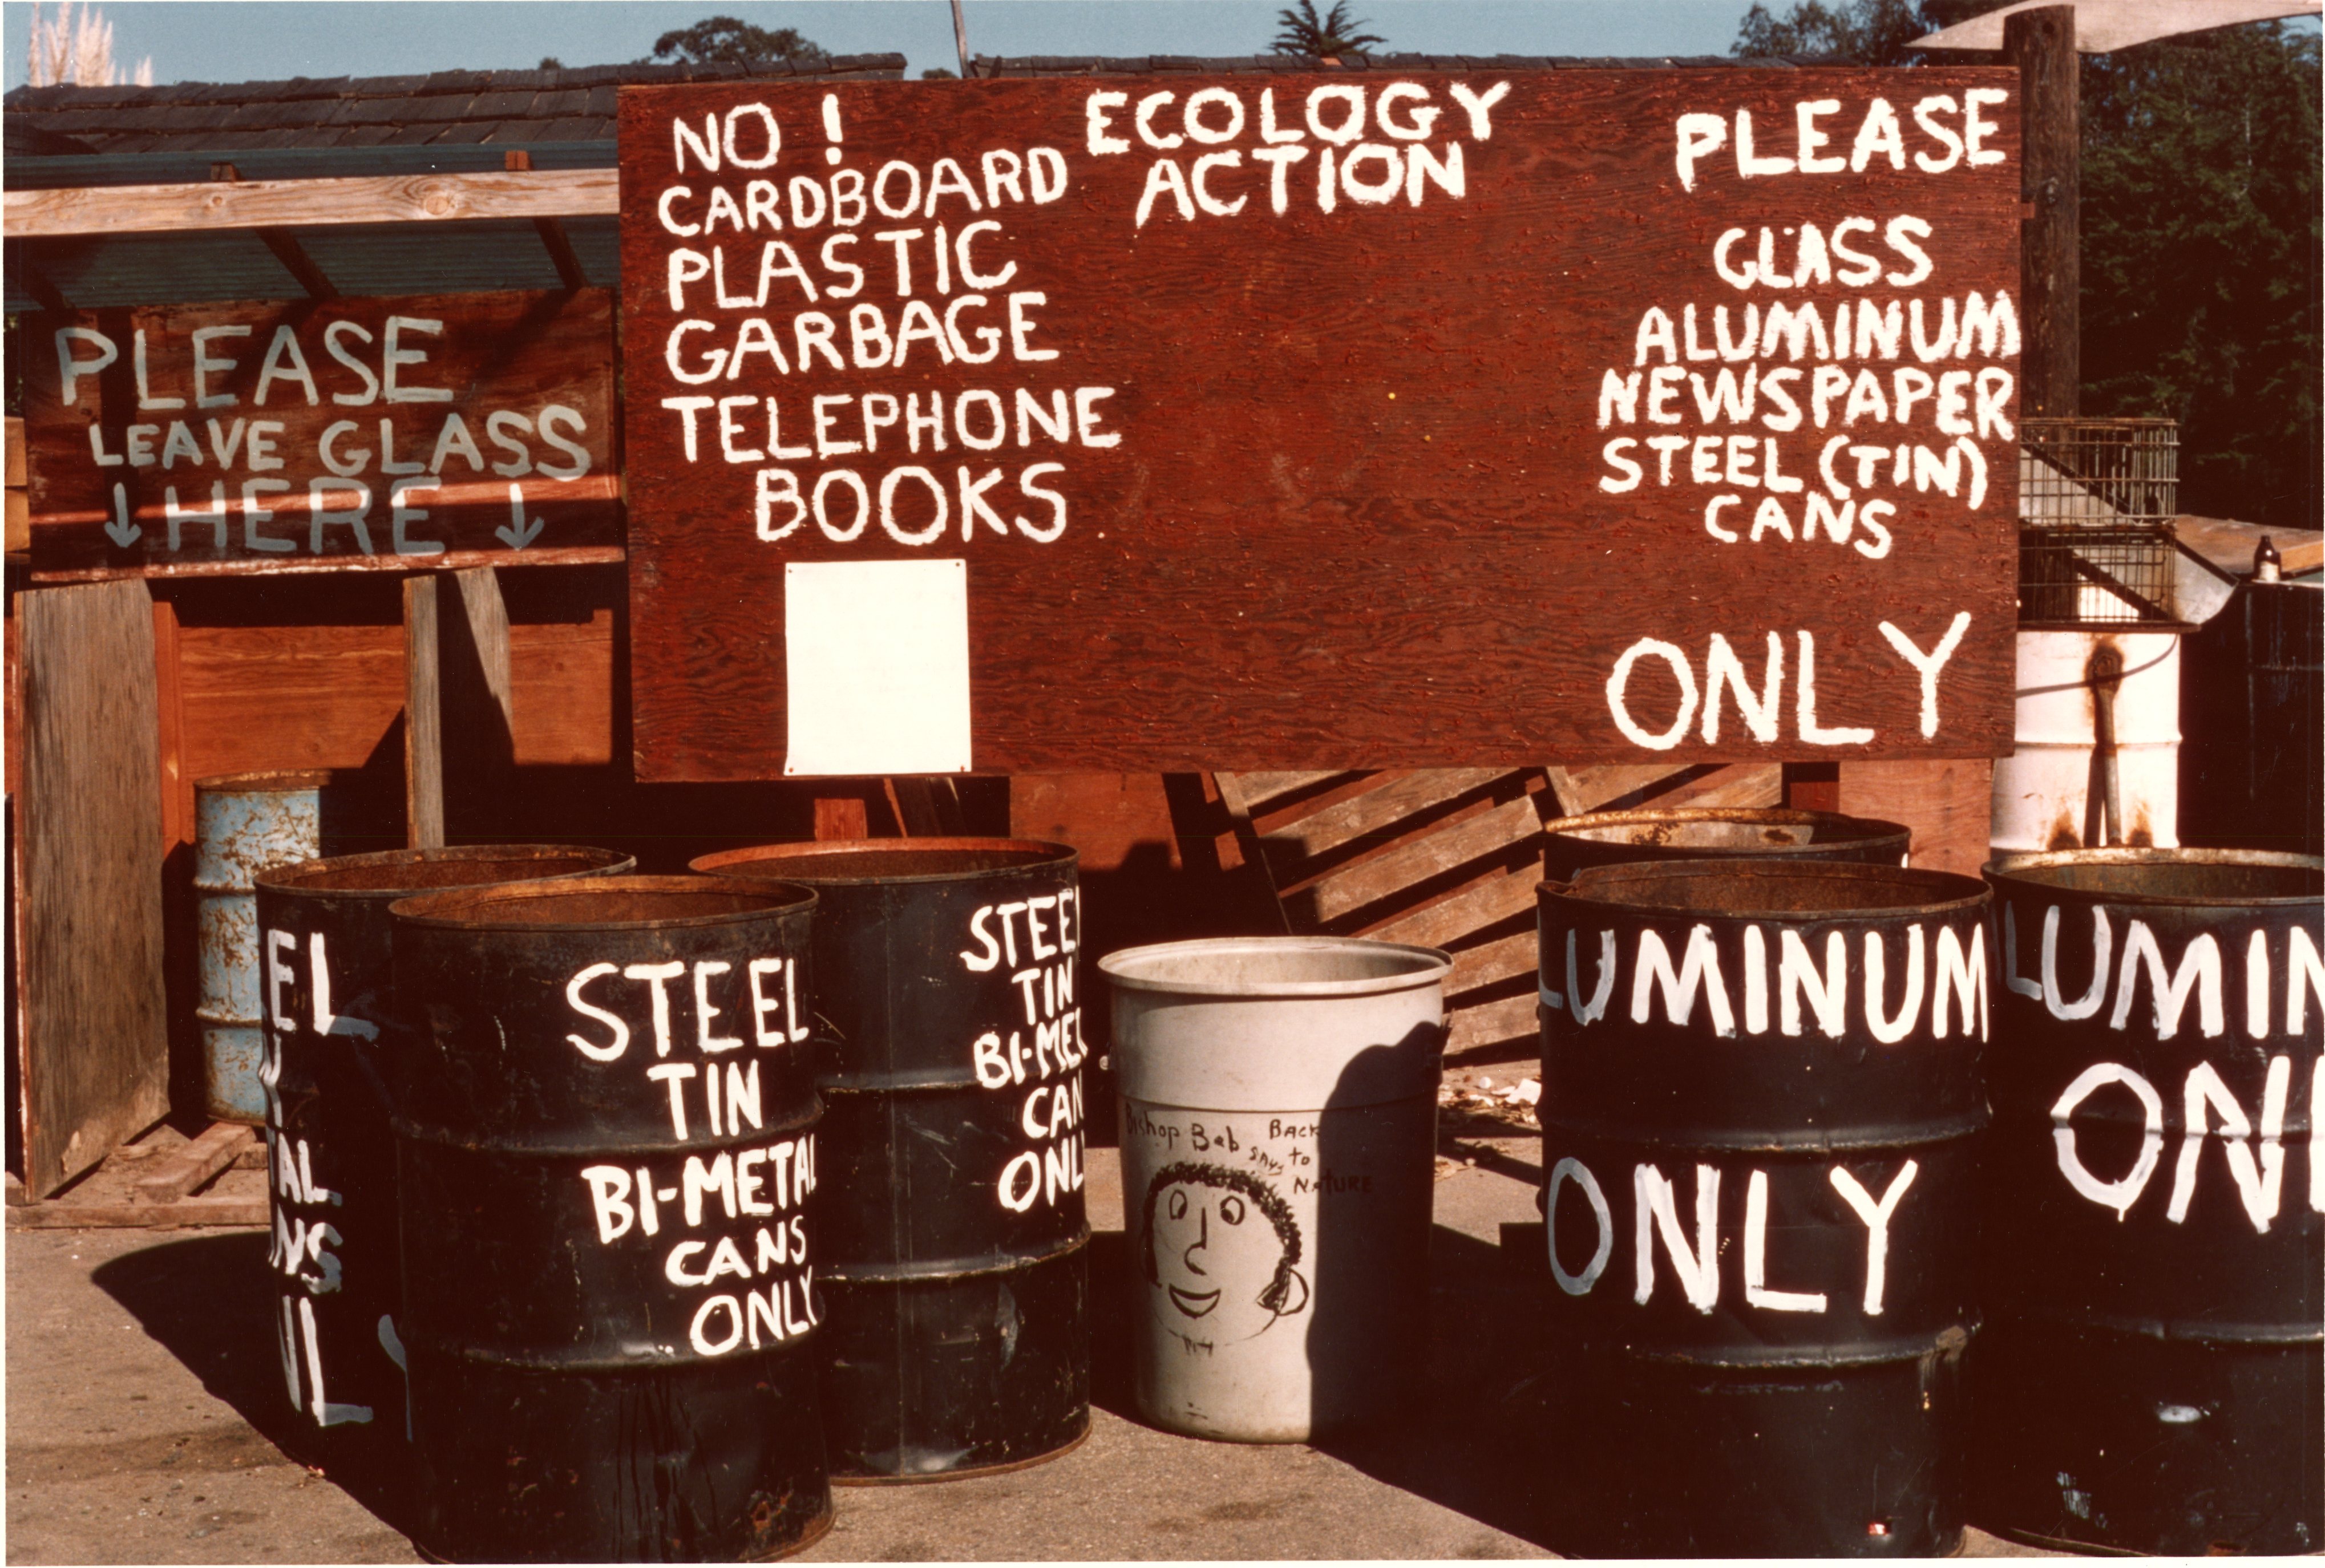 Marion Post Wolcott, "Entrance of Ecology Center," 1975. Photograph of hand-painted recycling barrels in front of the center.